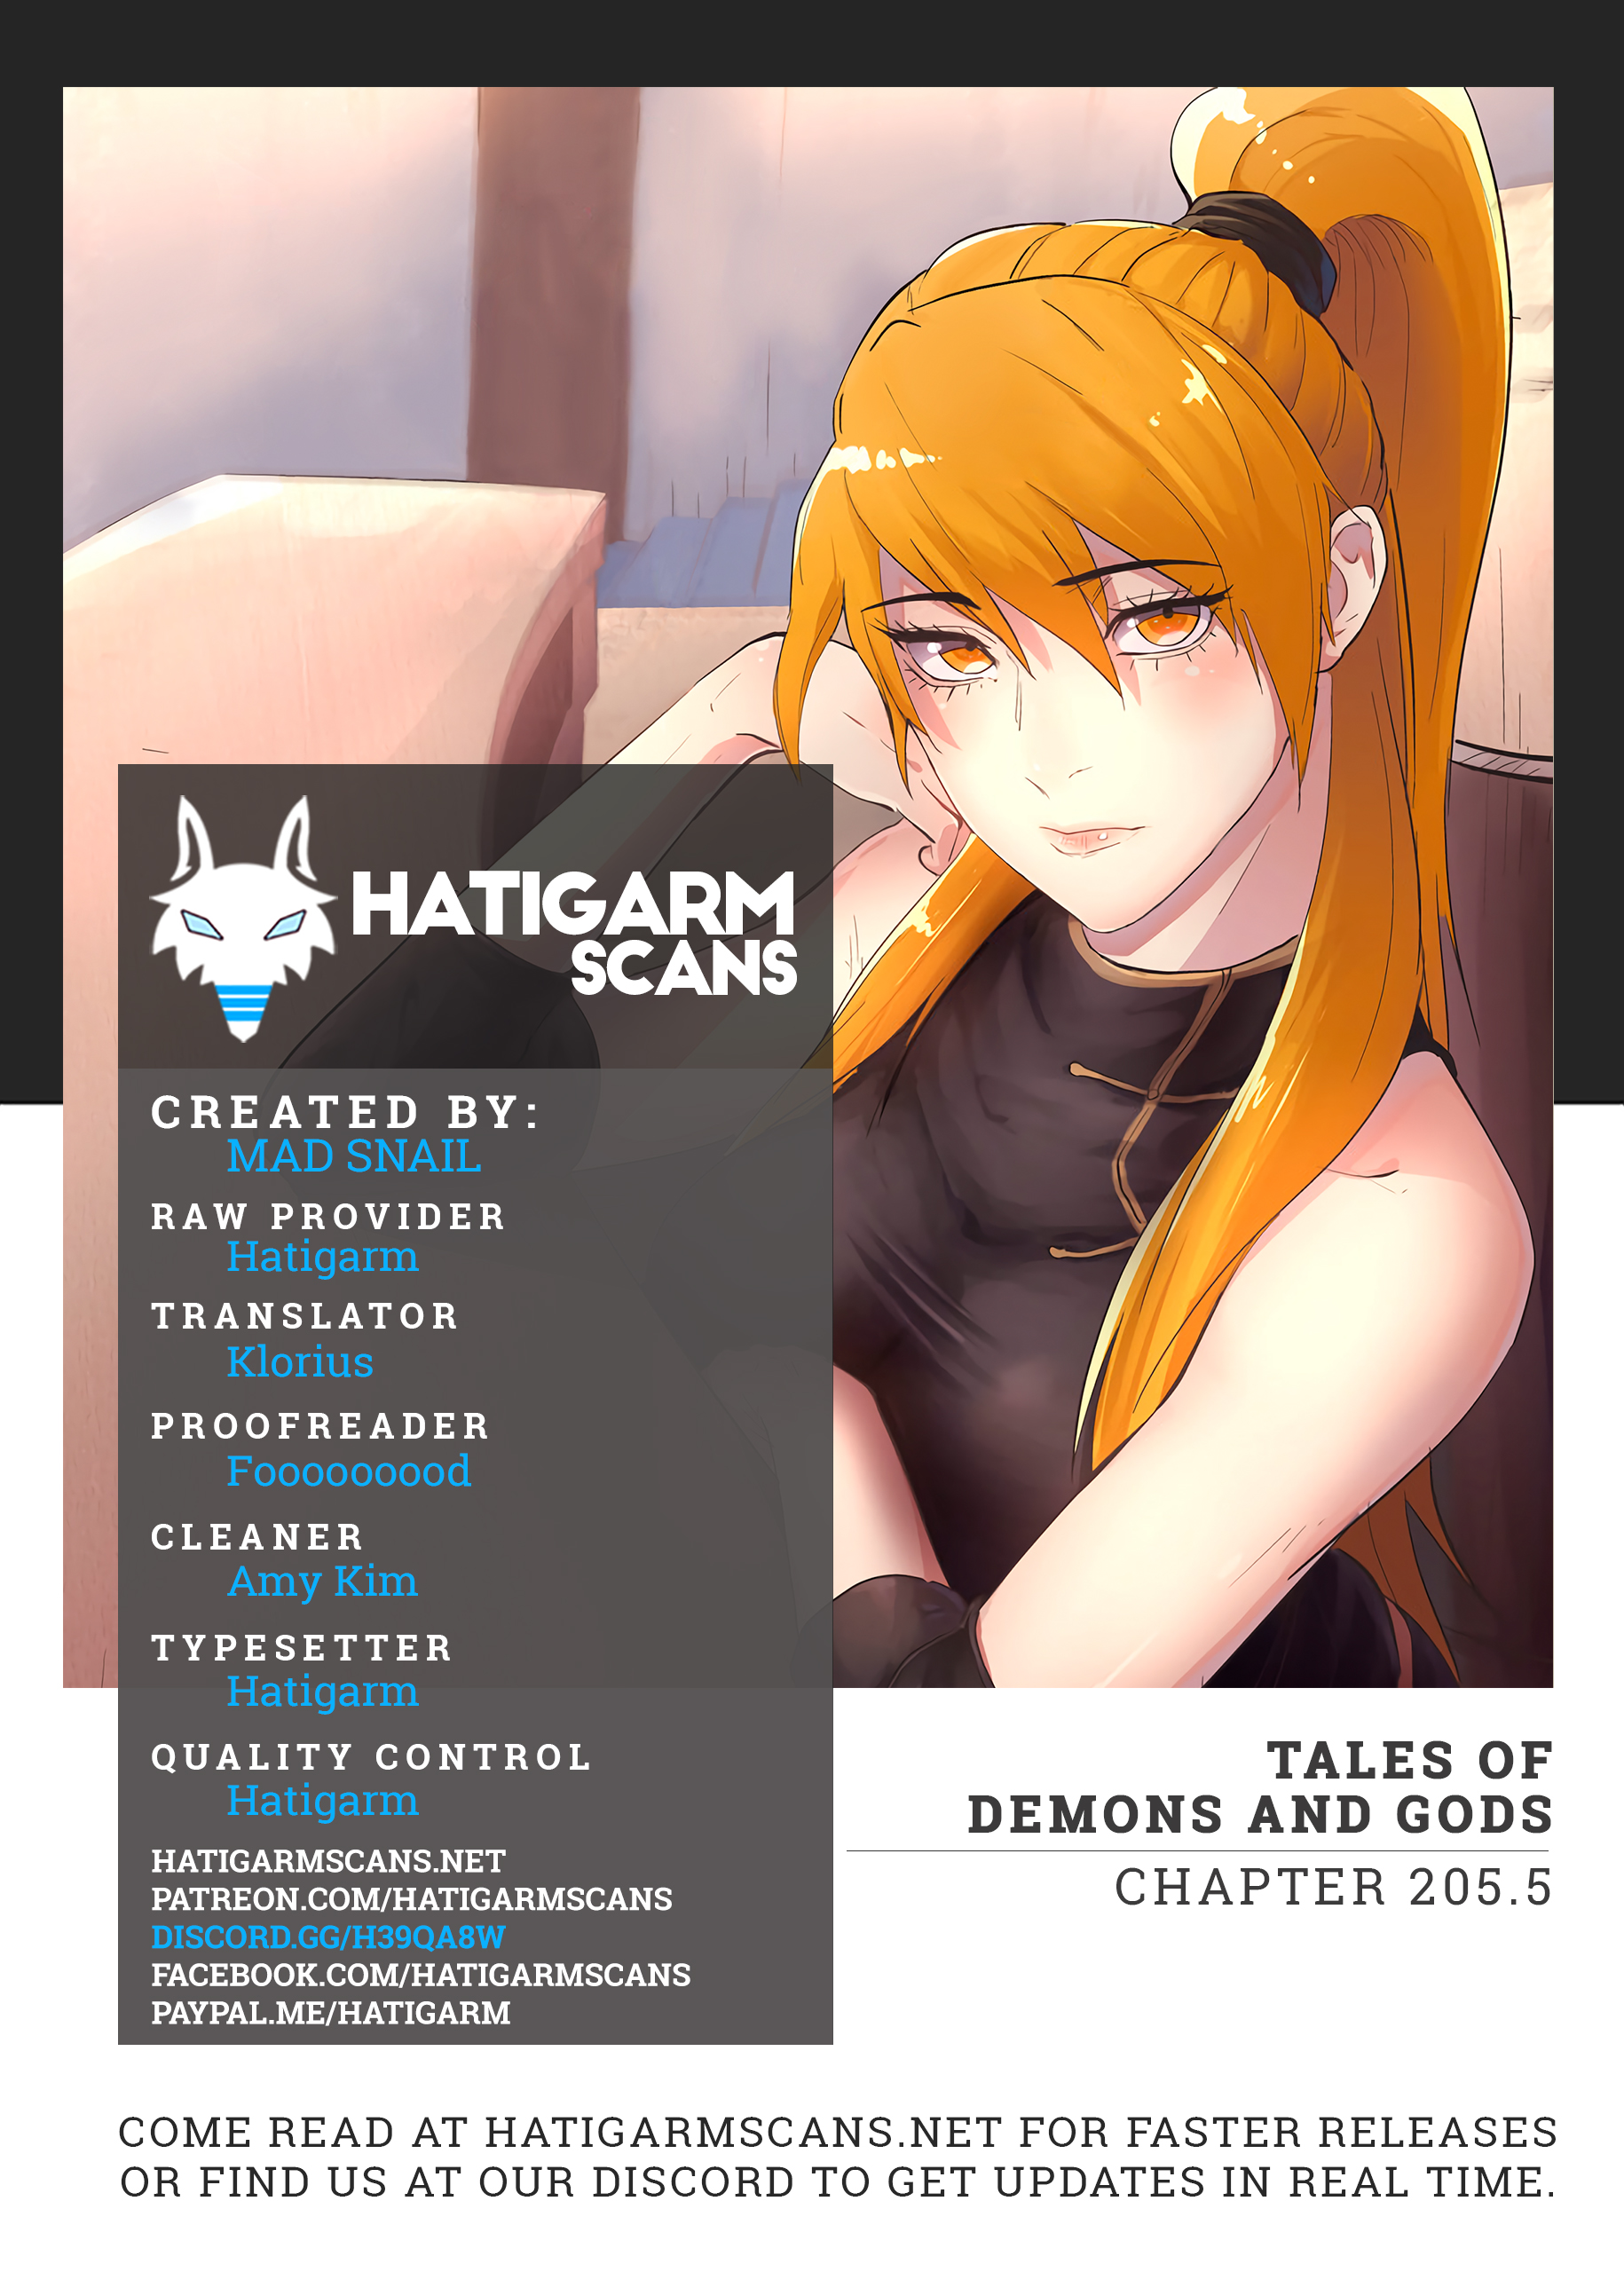 Tales of Demons and Gods - Chapter 7256 - True Intentions Finally Revealed (Part 2) - Image 1